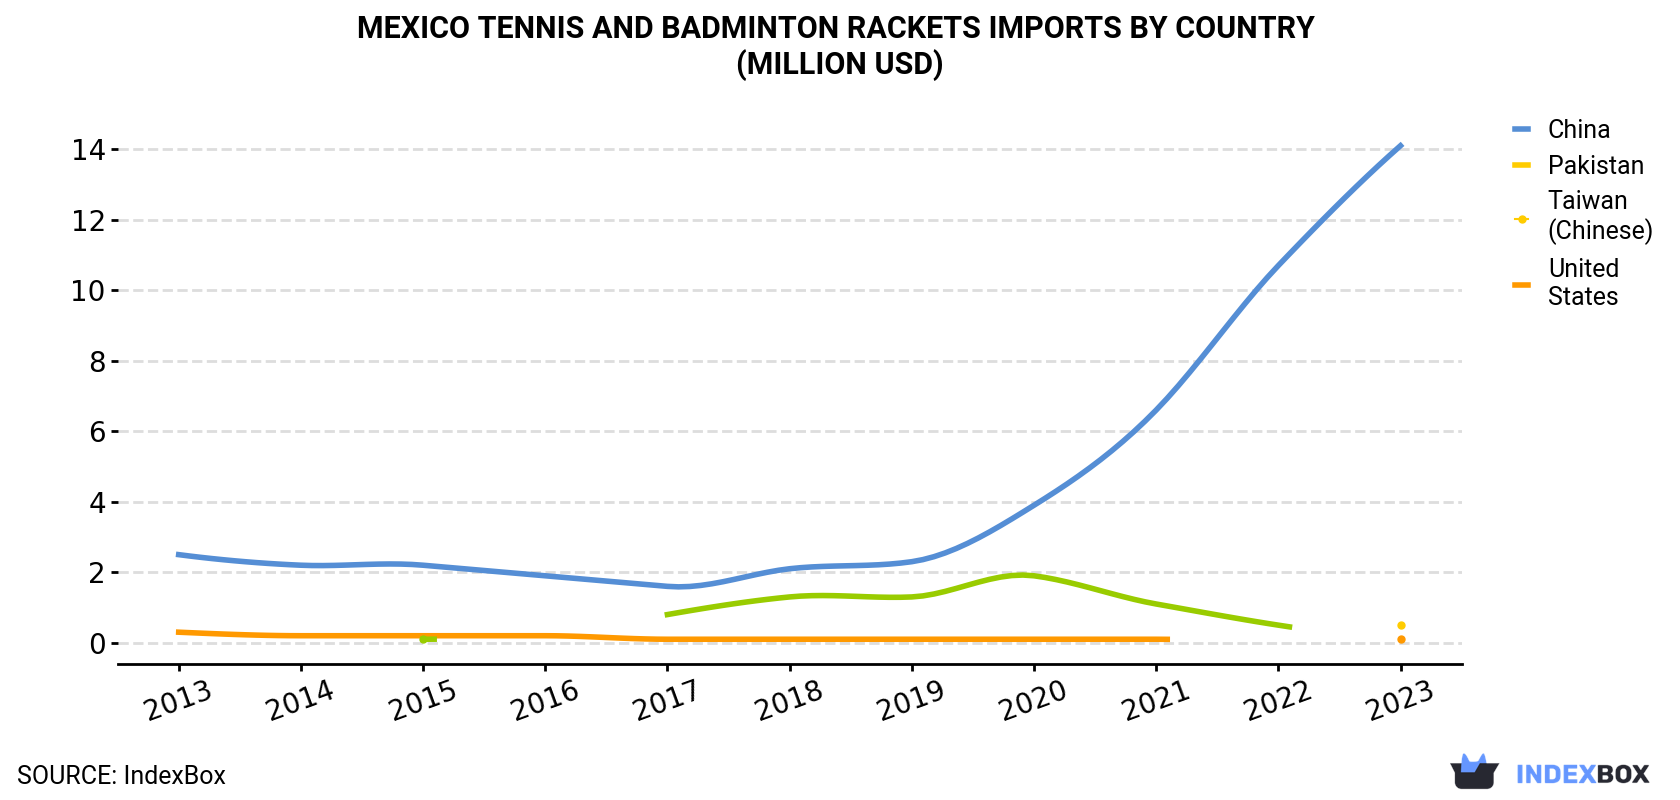 Mexico Tennis And Badminton Rackets Imports By Country (Million USD)